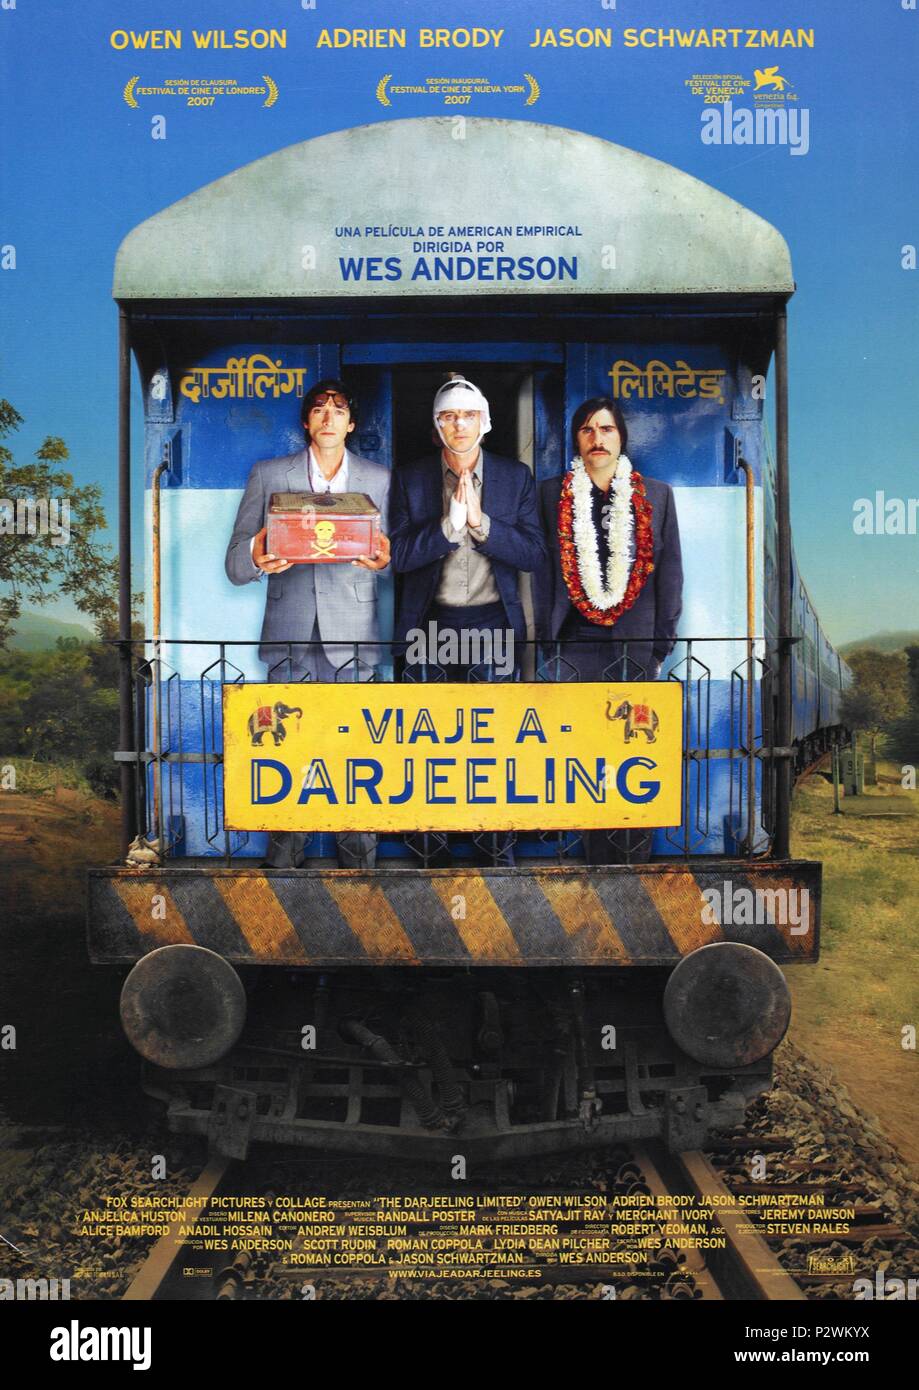 Original Film Title: THE DARJEELING LIMITED. English Title: THE